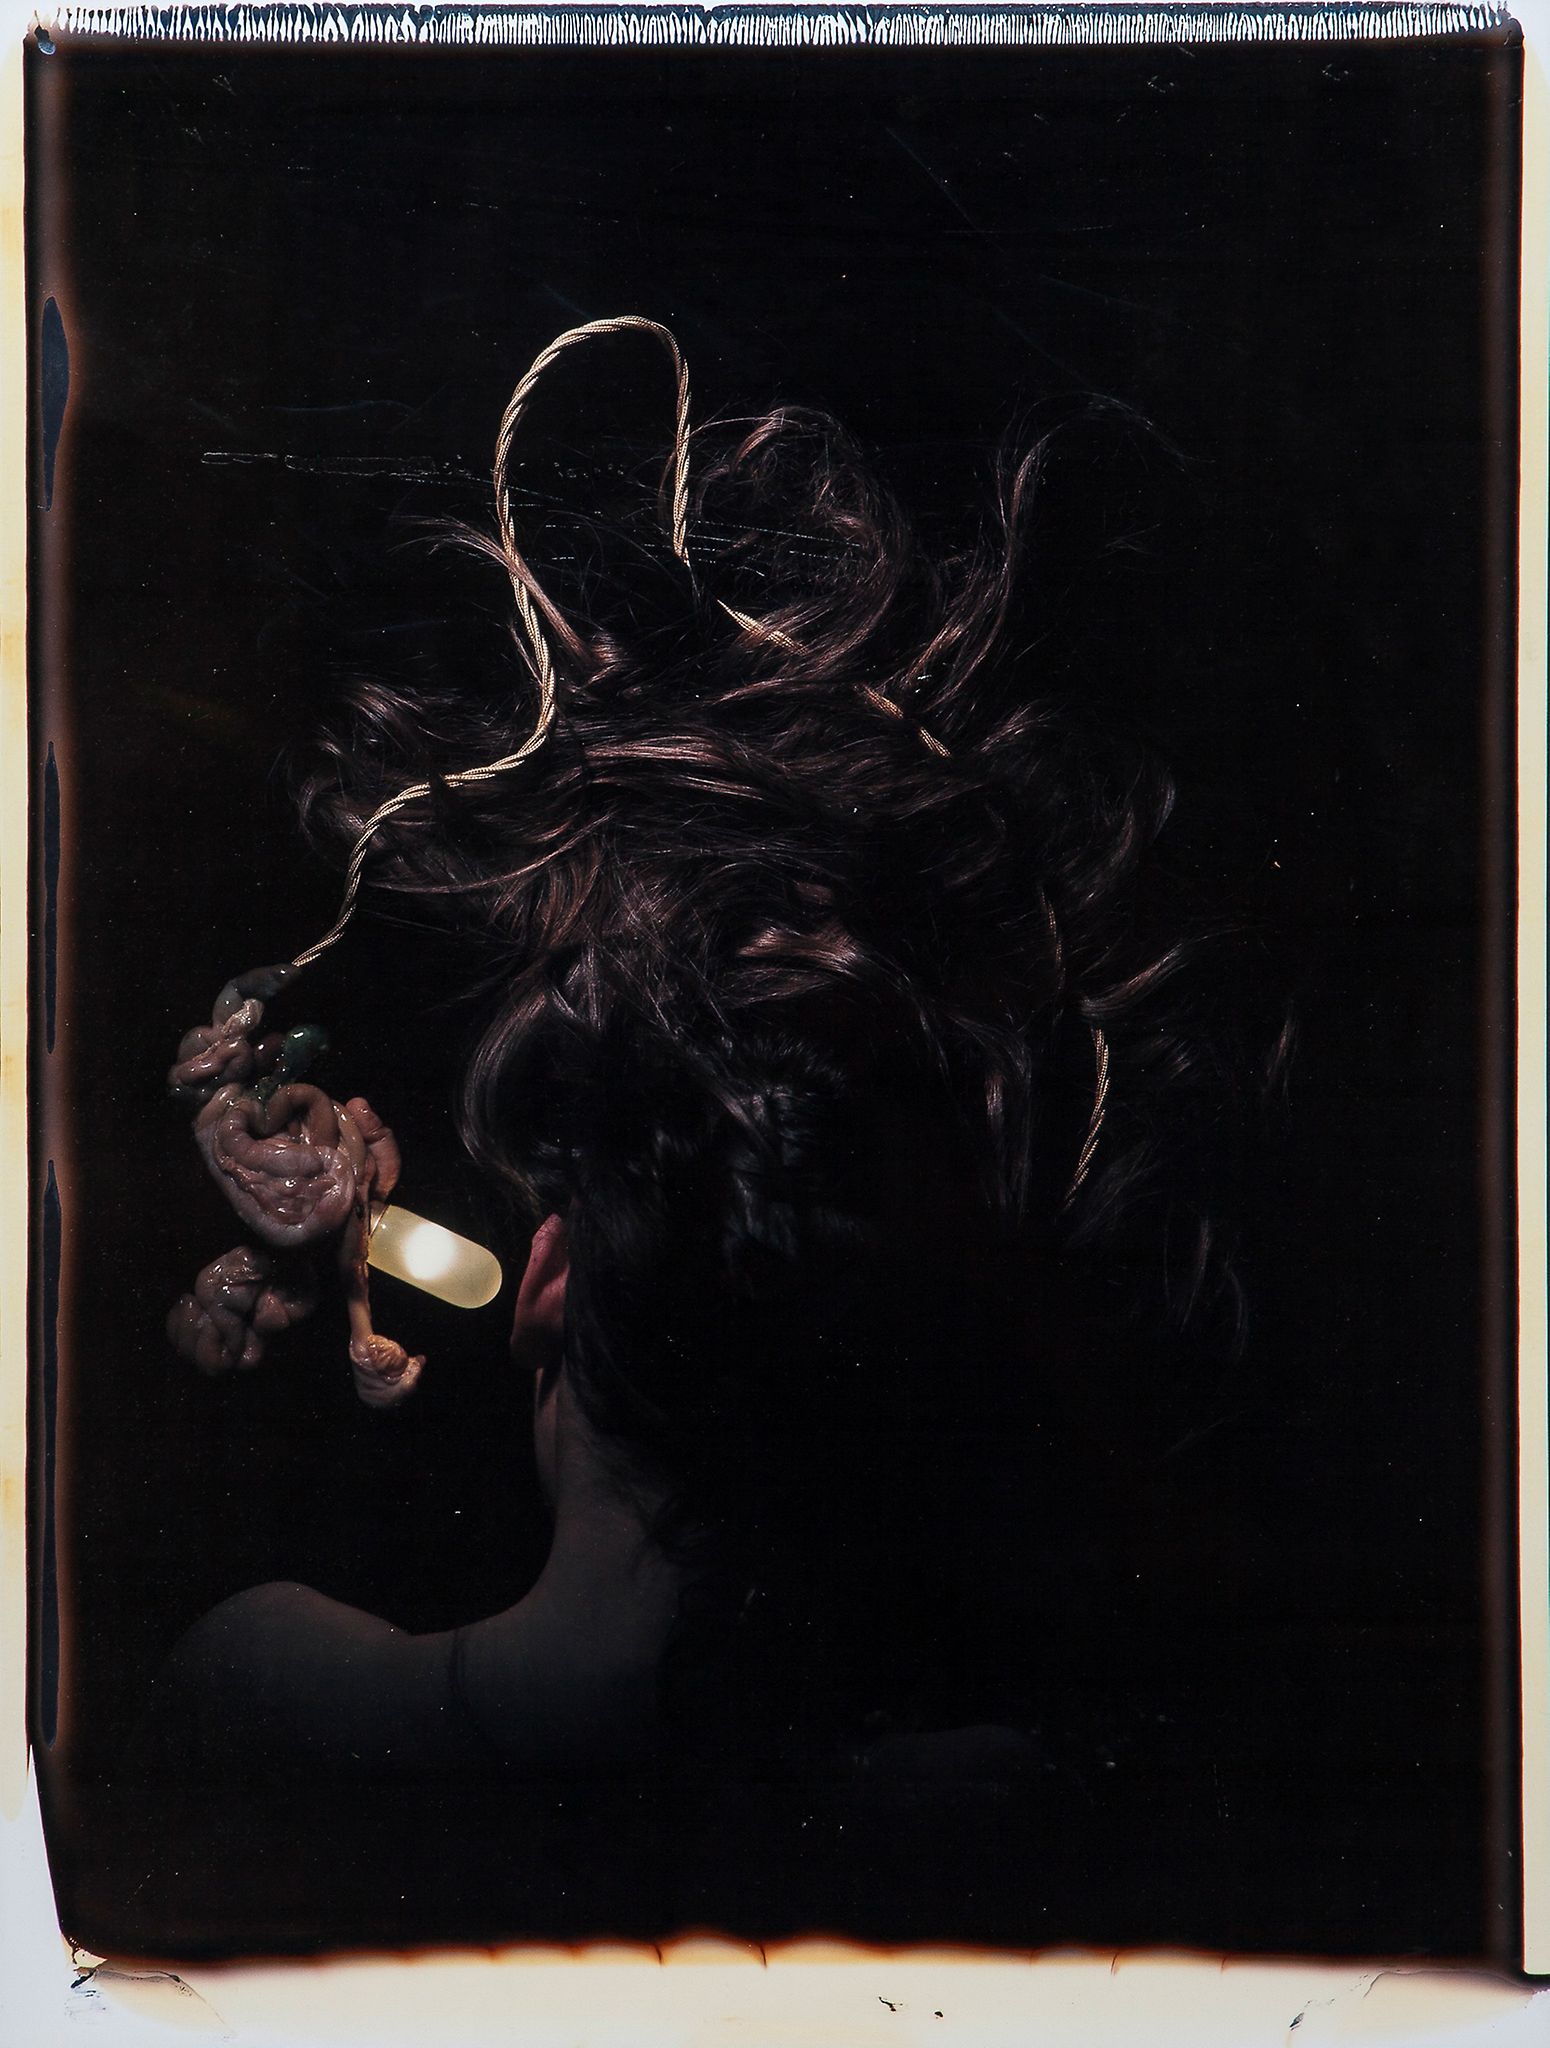 Helen Chadwick (1953-1996) - Meat Abstract No. 7 Hair and Entrails polaroid with paint inside